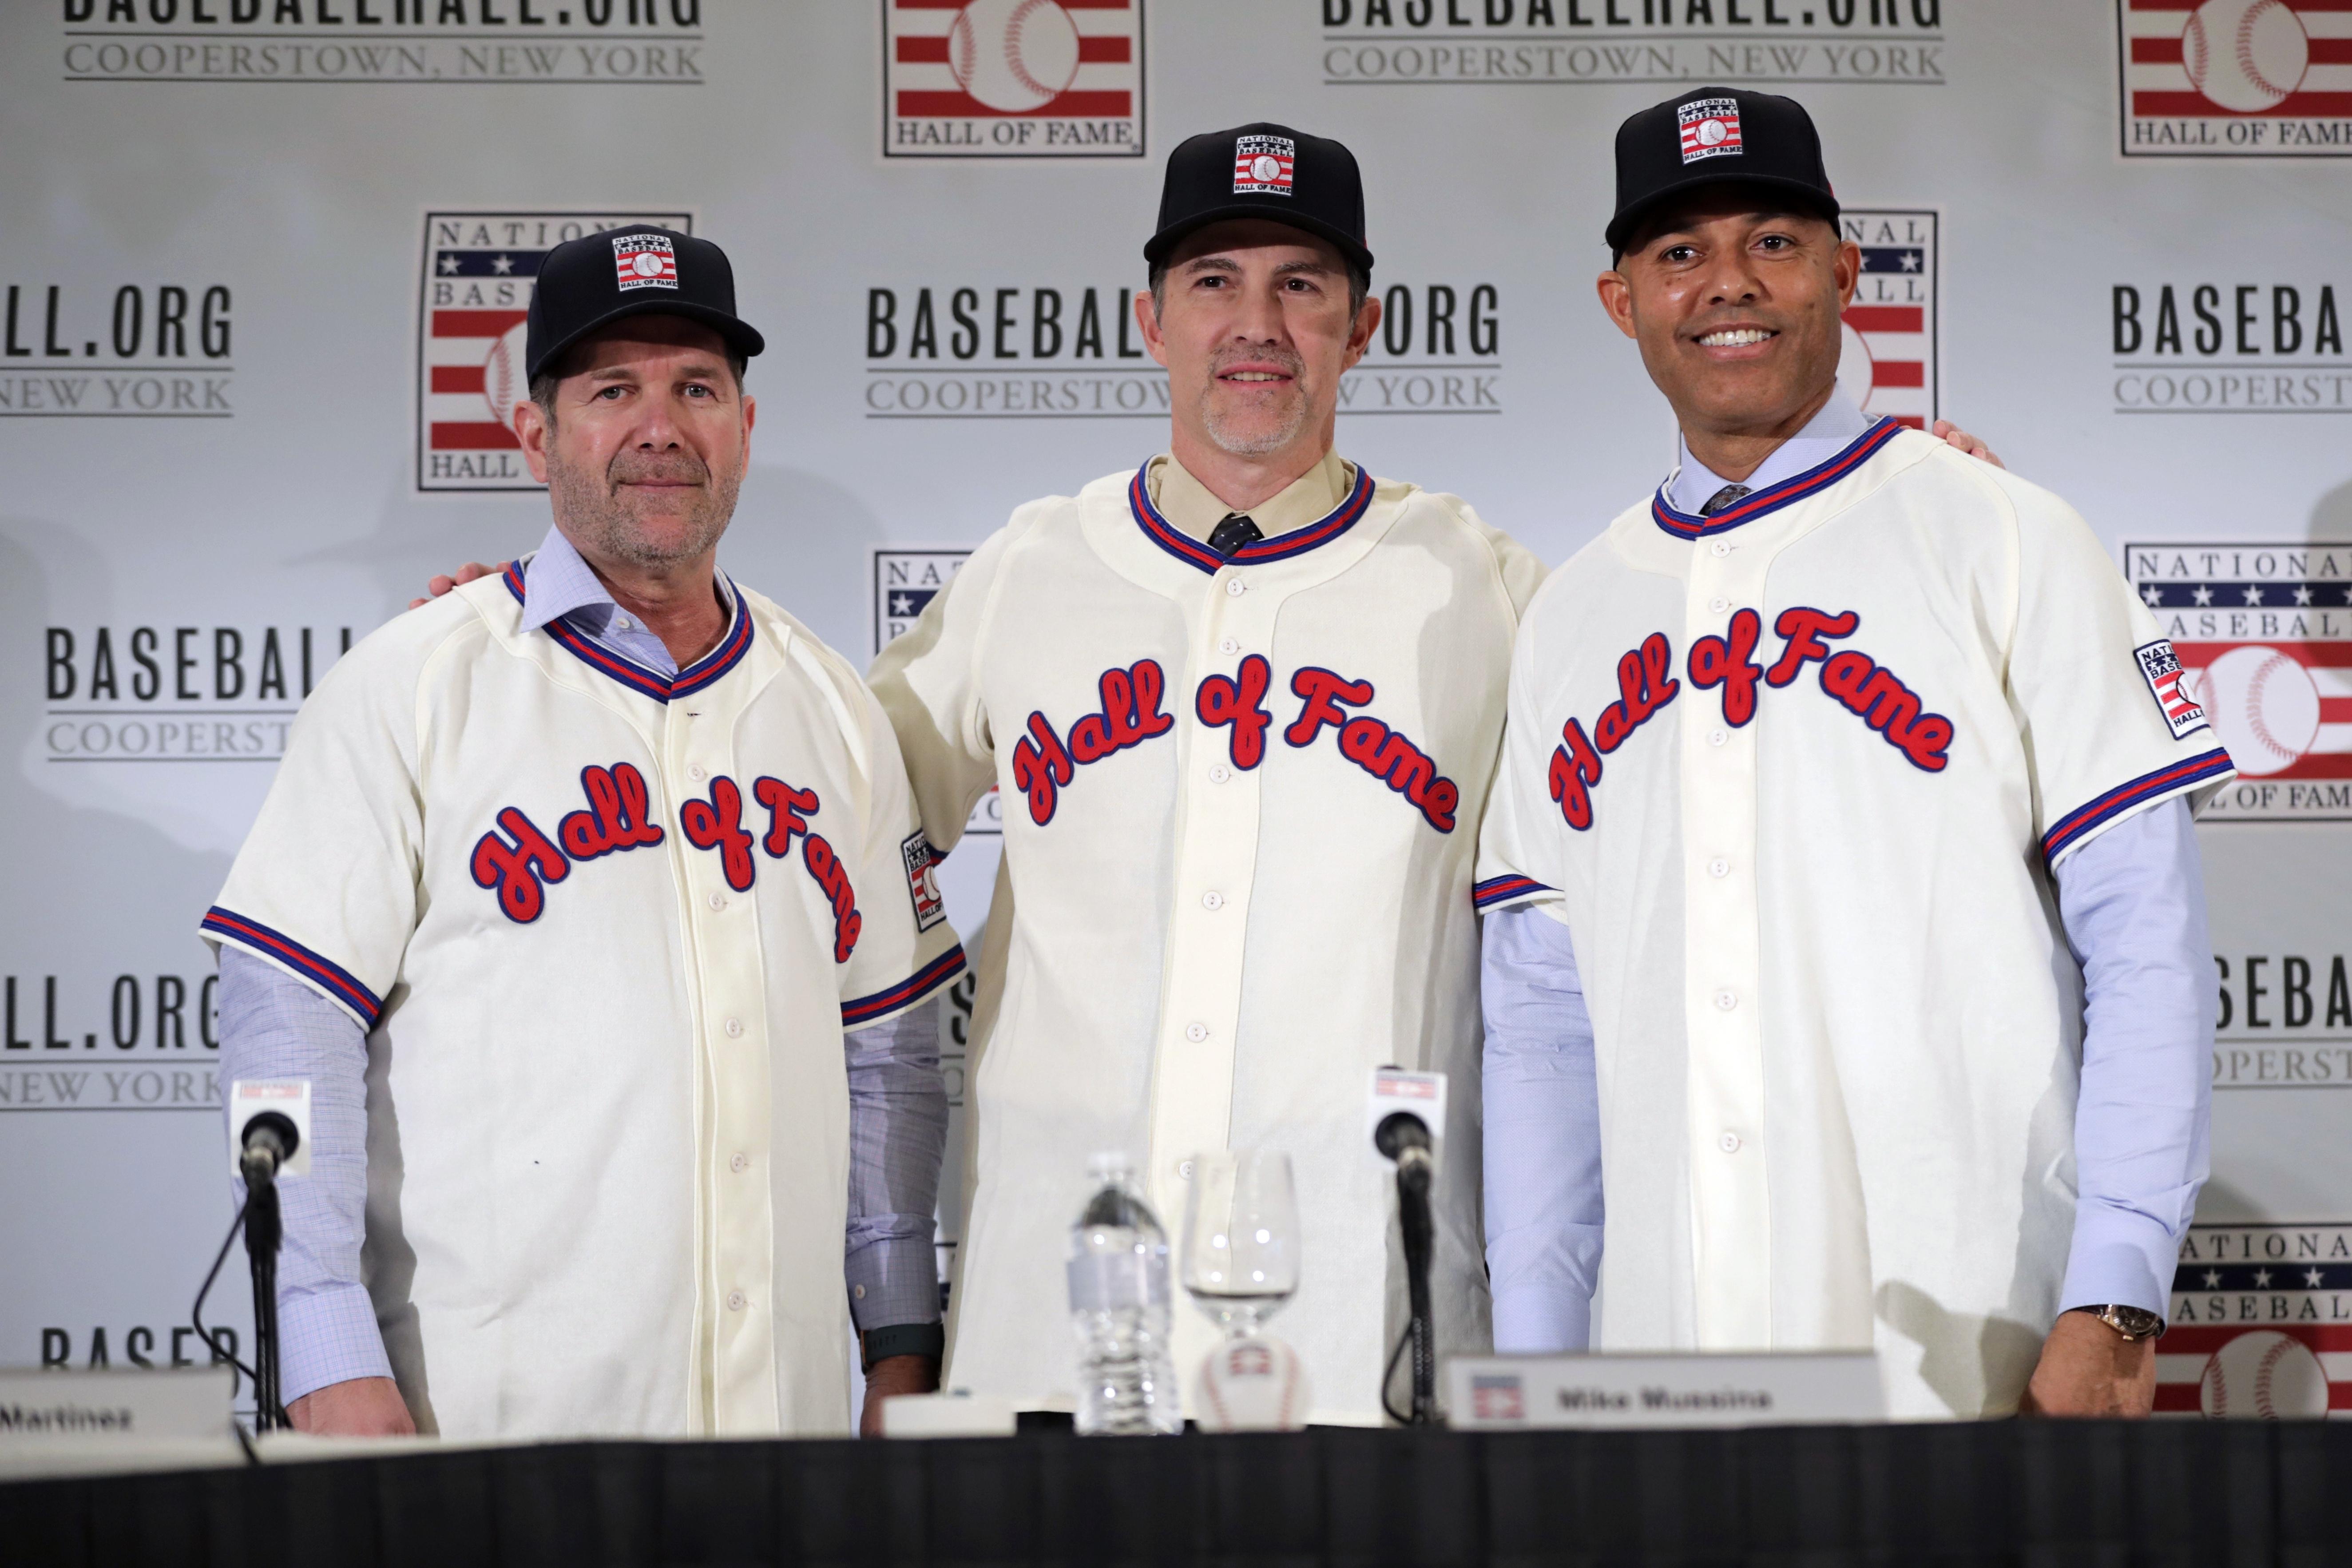 A look at players to be inducted into Baseball Hall of Fame The